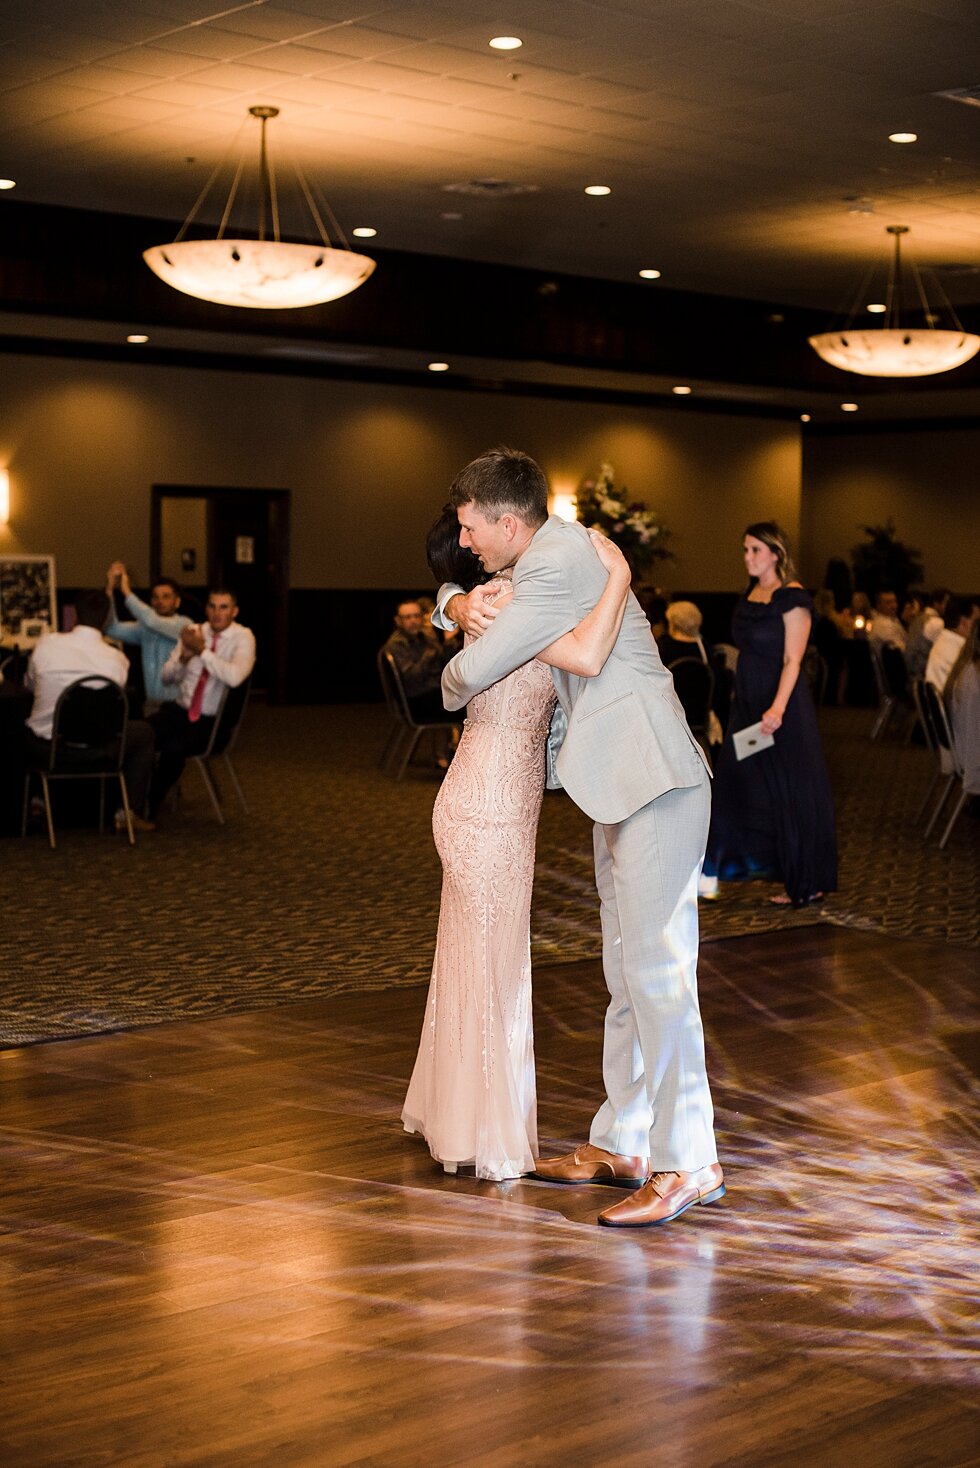  Hug between mother and son after they shared a dance during this wedding reception. wedding ceremony details stunning photography married midwest louisville kentucky #weddingphoto #love #justmarried #midwestphotographer #kywedding #louisville #kentu